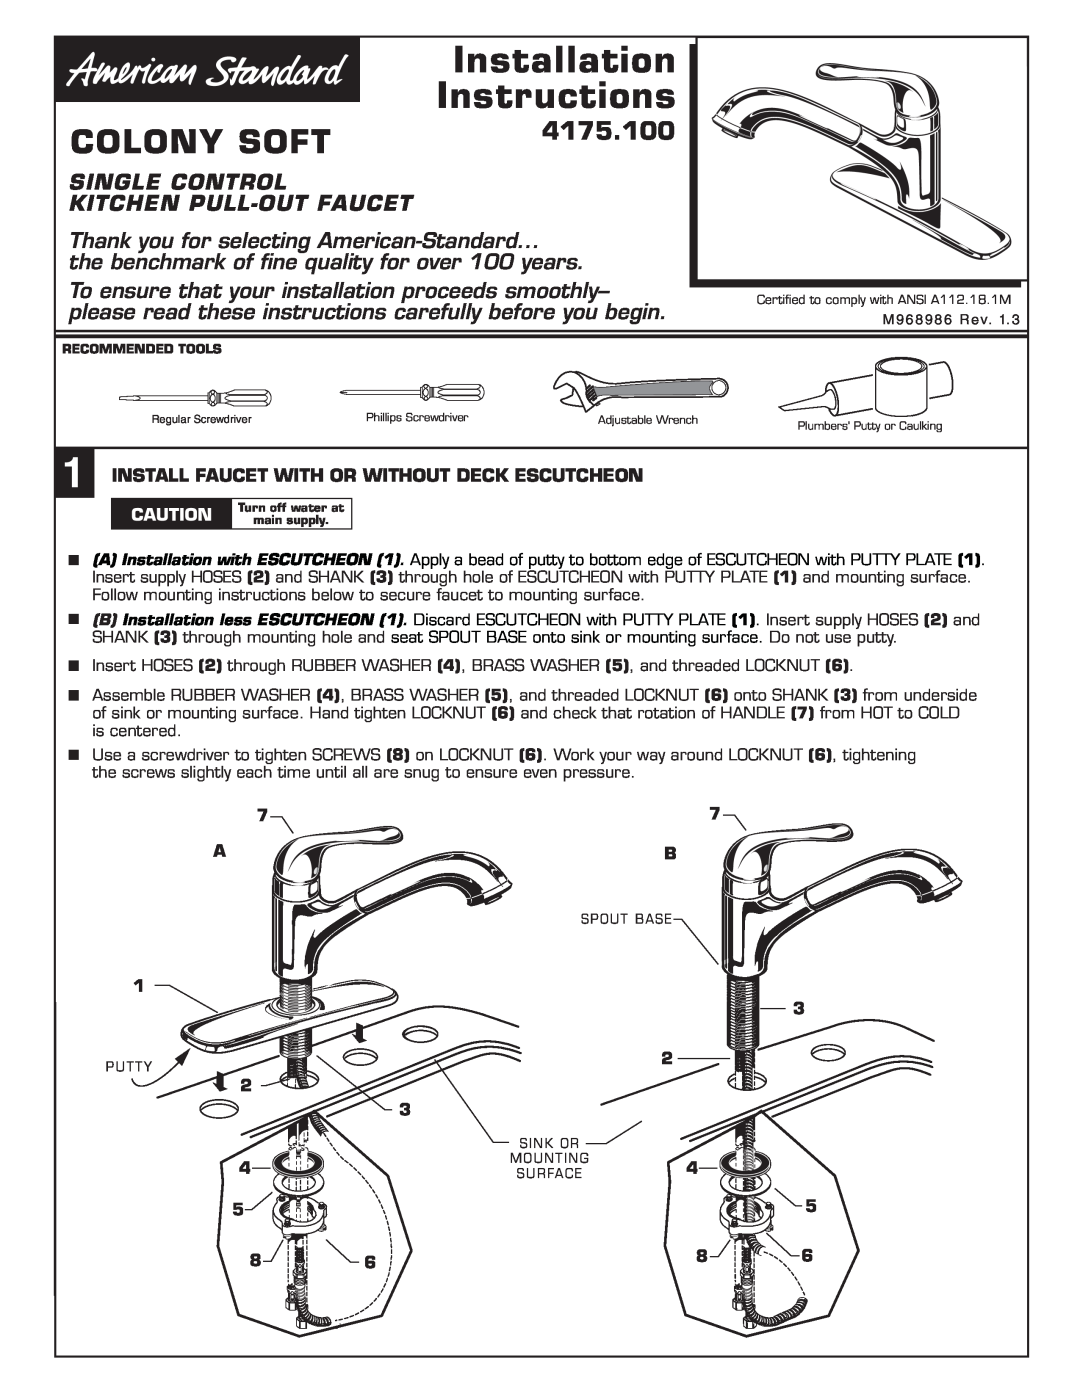 American Standard installation instructions Install Faucet With Or Without Deck Escutcheon, Colony Soft, 4175.100 